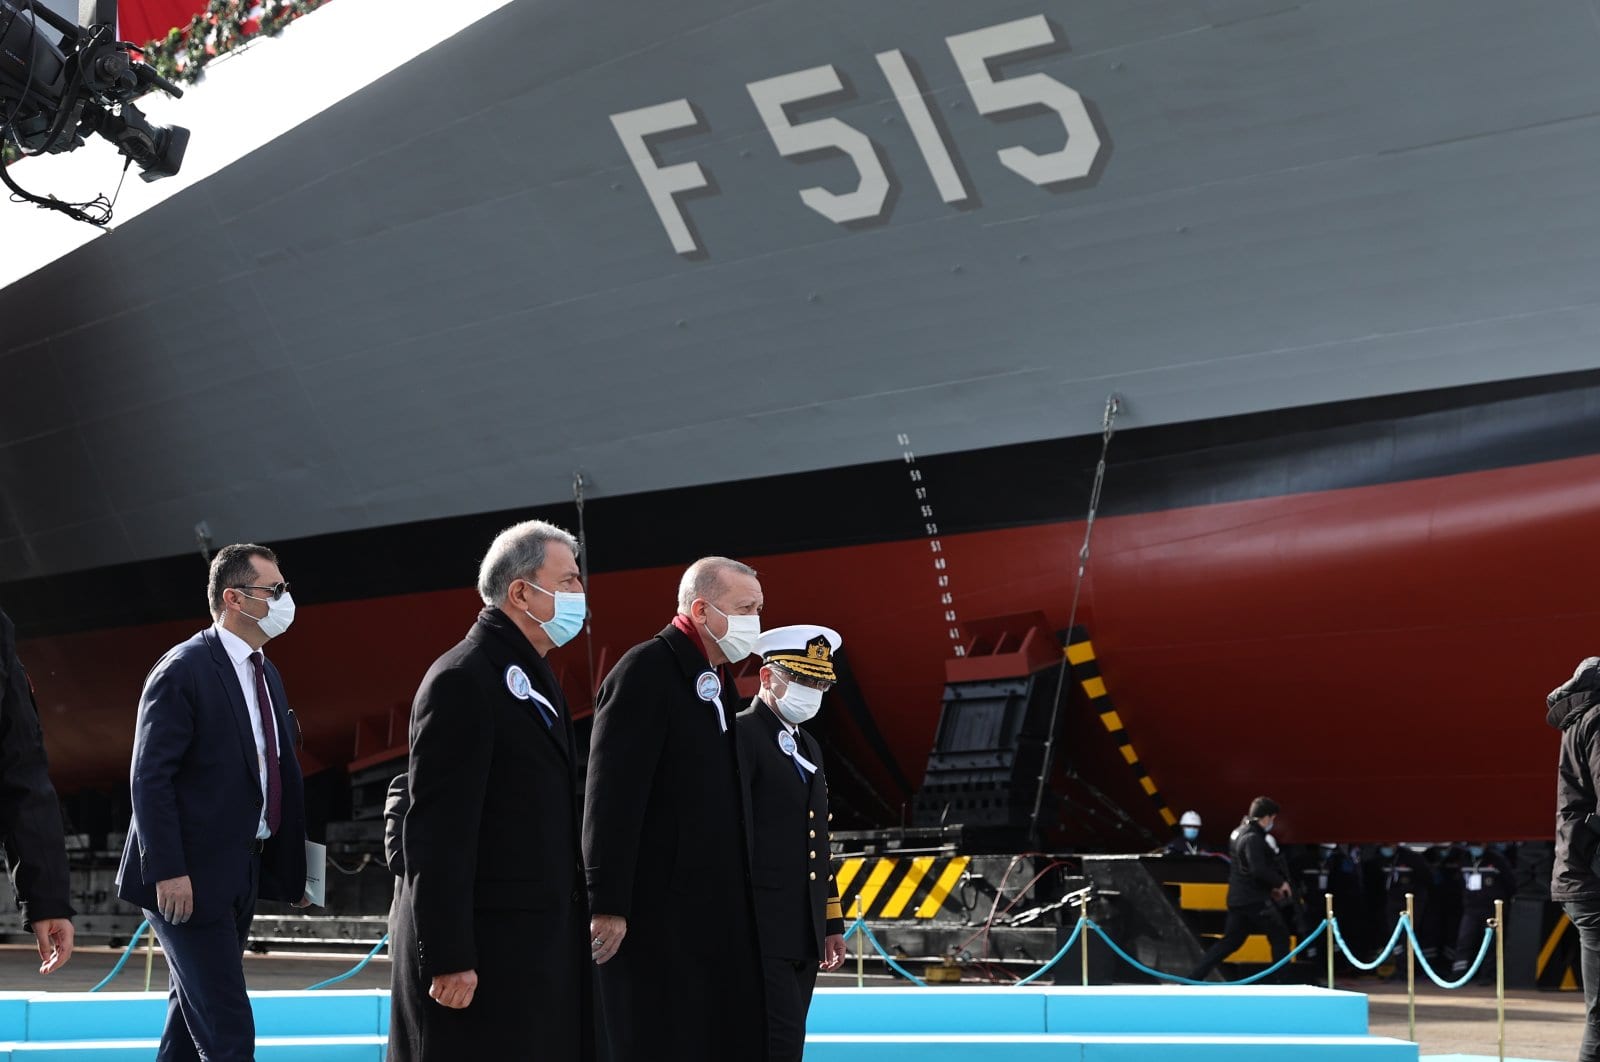 Turkey among 10 countries that design, build and maintain their own warships, Erdoğan says